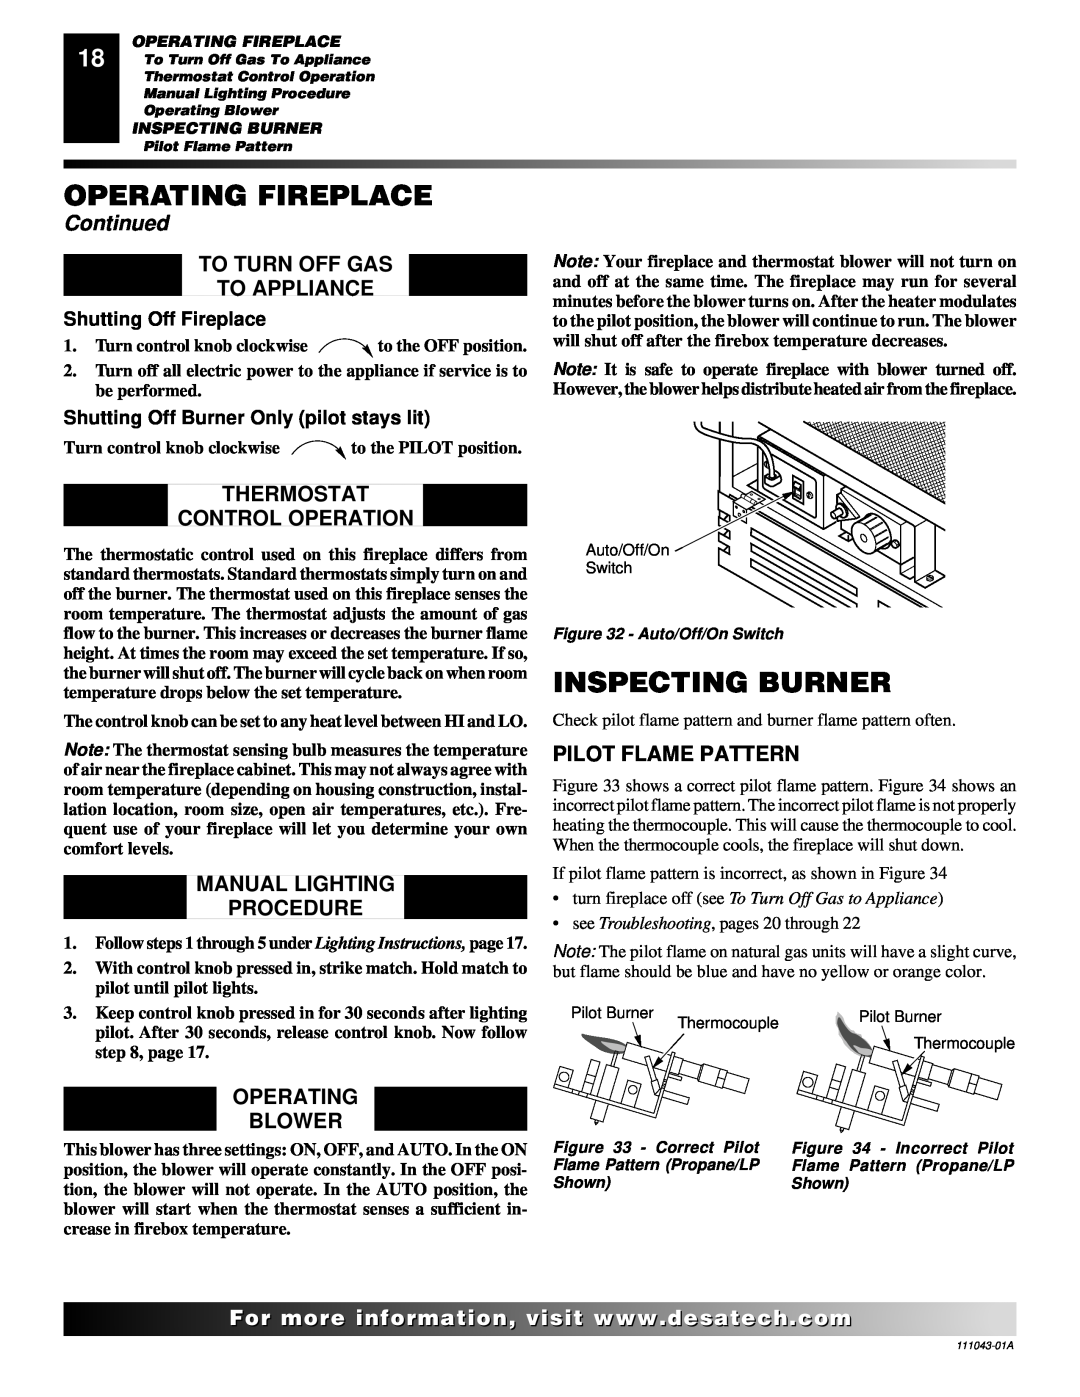 Vanguard Heating WMH26TNB installation manual Inspecting Burner, Operating Fireplace, Continued, Shutting Off Fireplace 